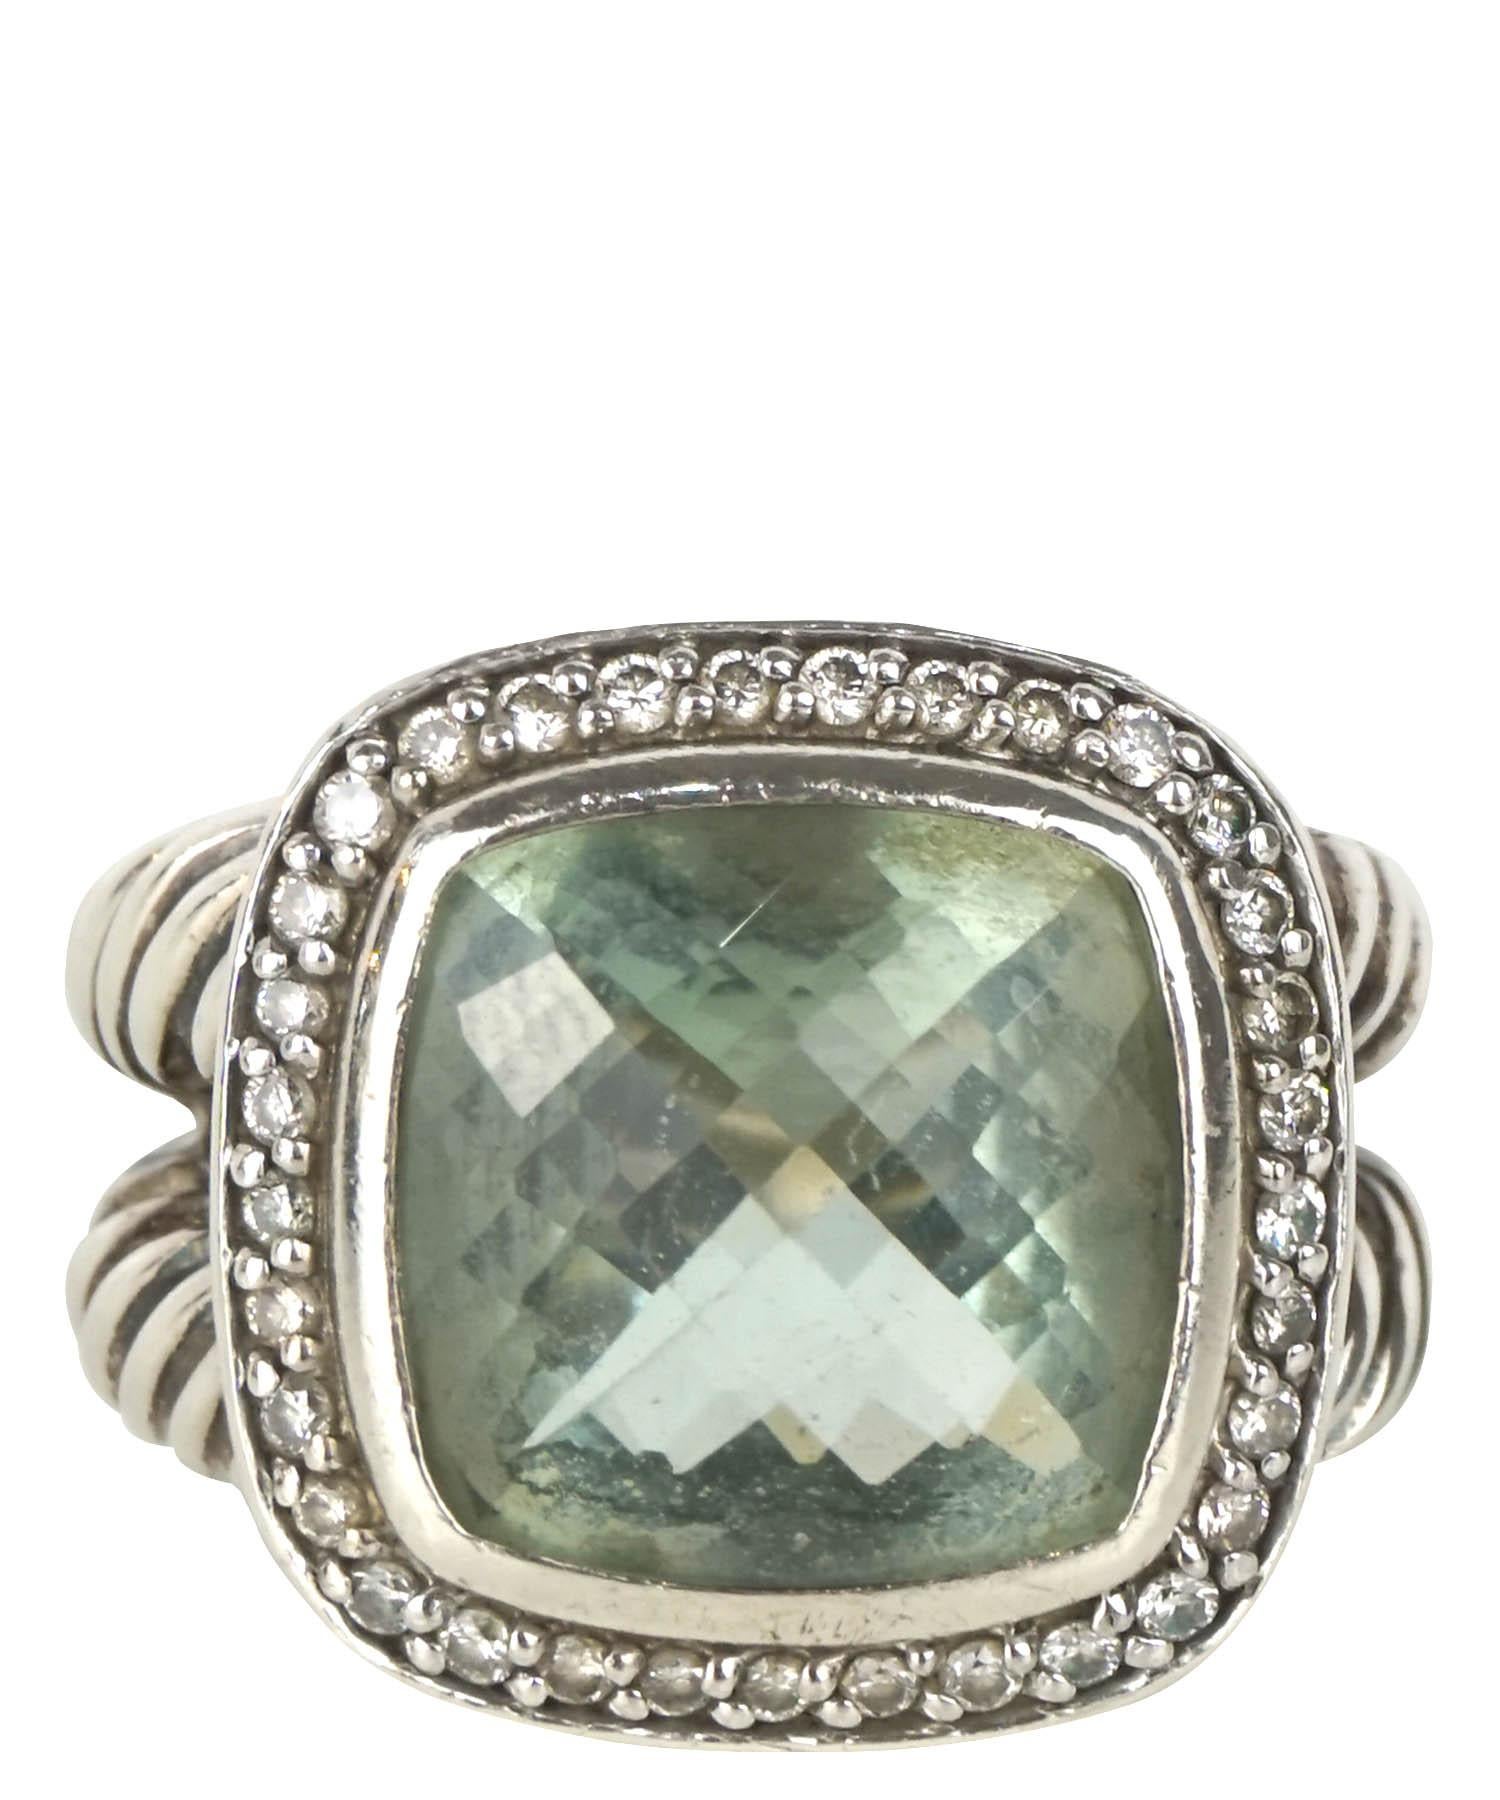 David Yurman Albion ring features two thick cable wrapped bands with a faceted cushion cut prasiolite gemstone center bordered by pave diamonds. US size 4.75. Made in New York, USA. Ring is in excellent condition and shows no sign of use. Makers